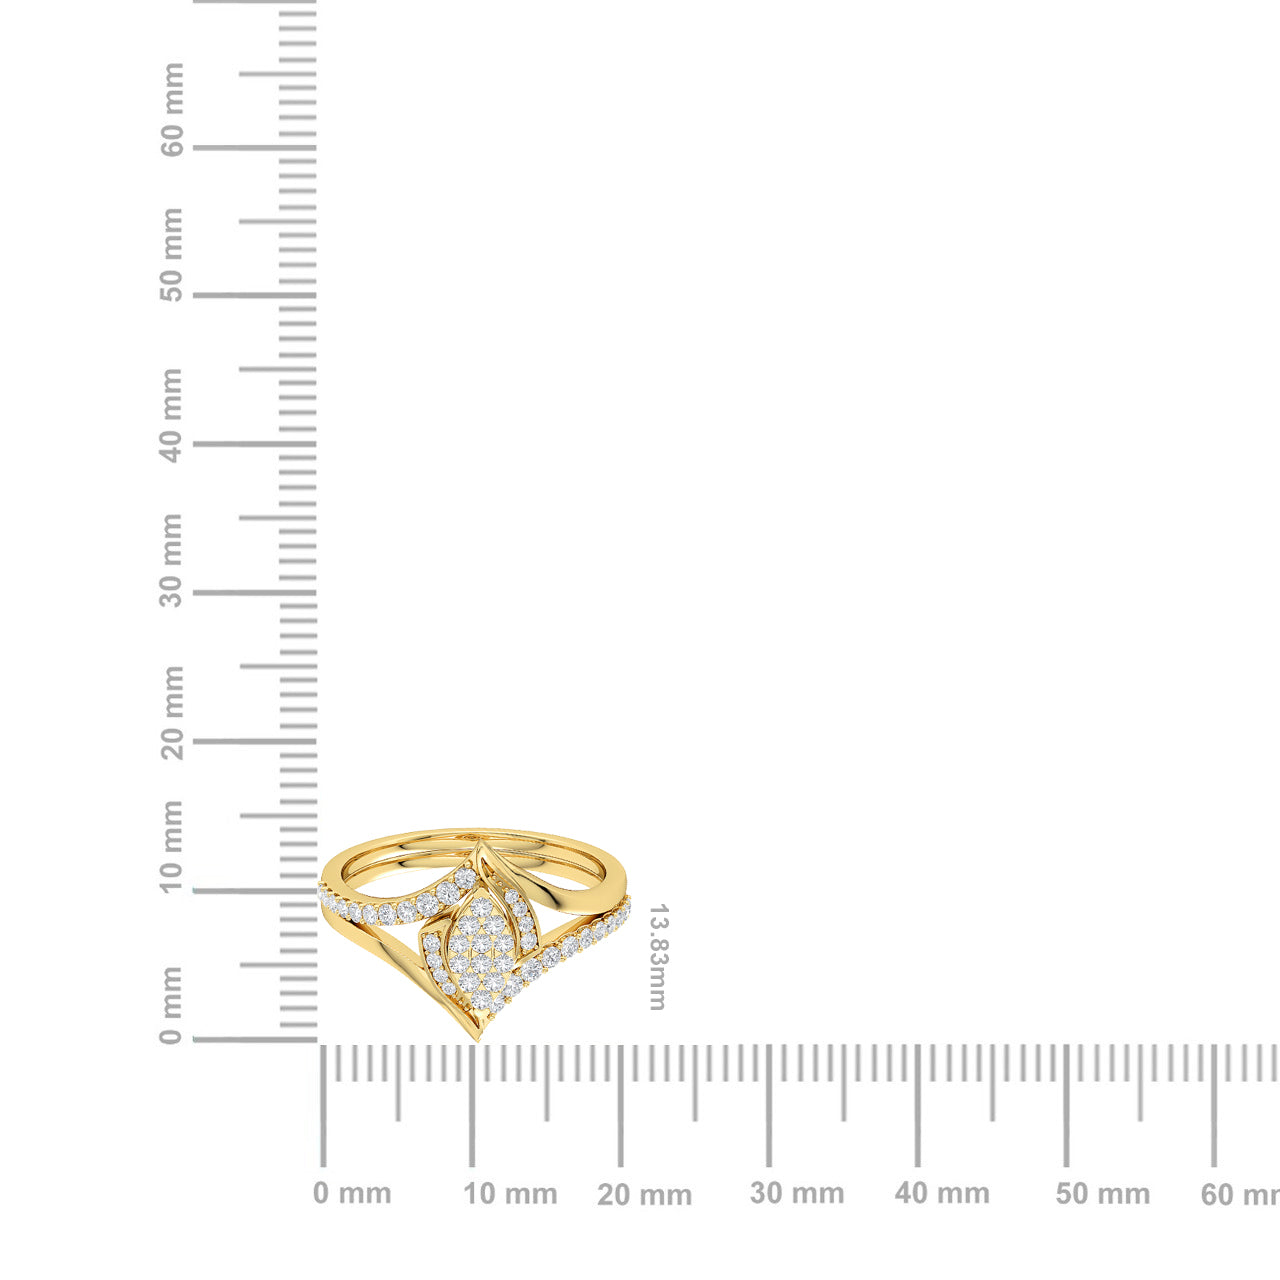 Certified 14K Gold  0.4ct Natural Diamond Engagement Twisted Shank Double Halo Ring